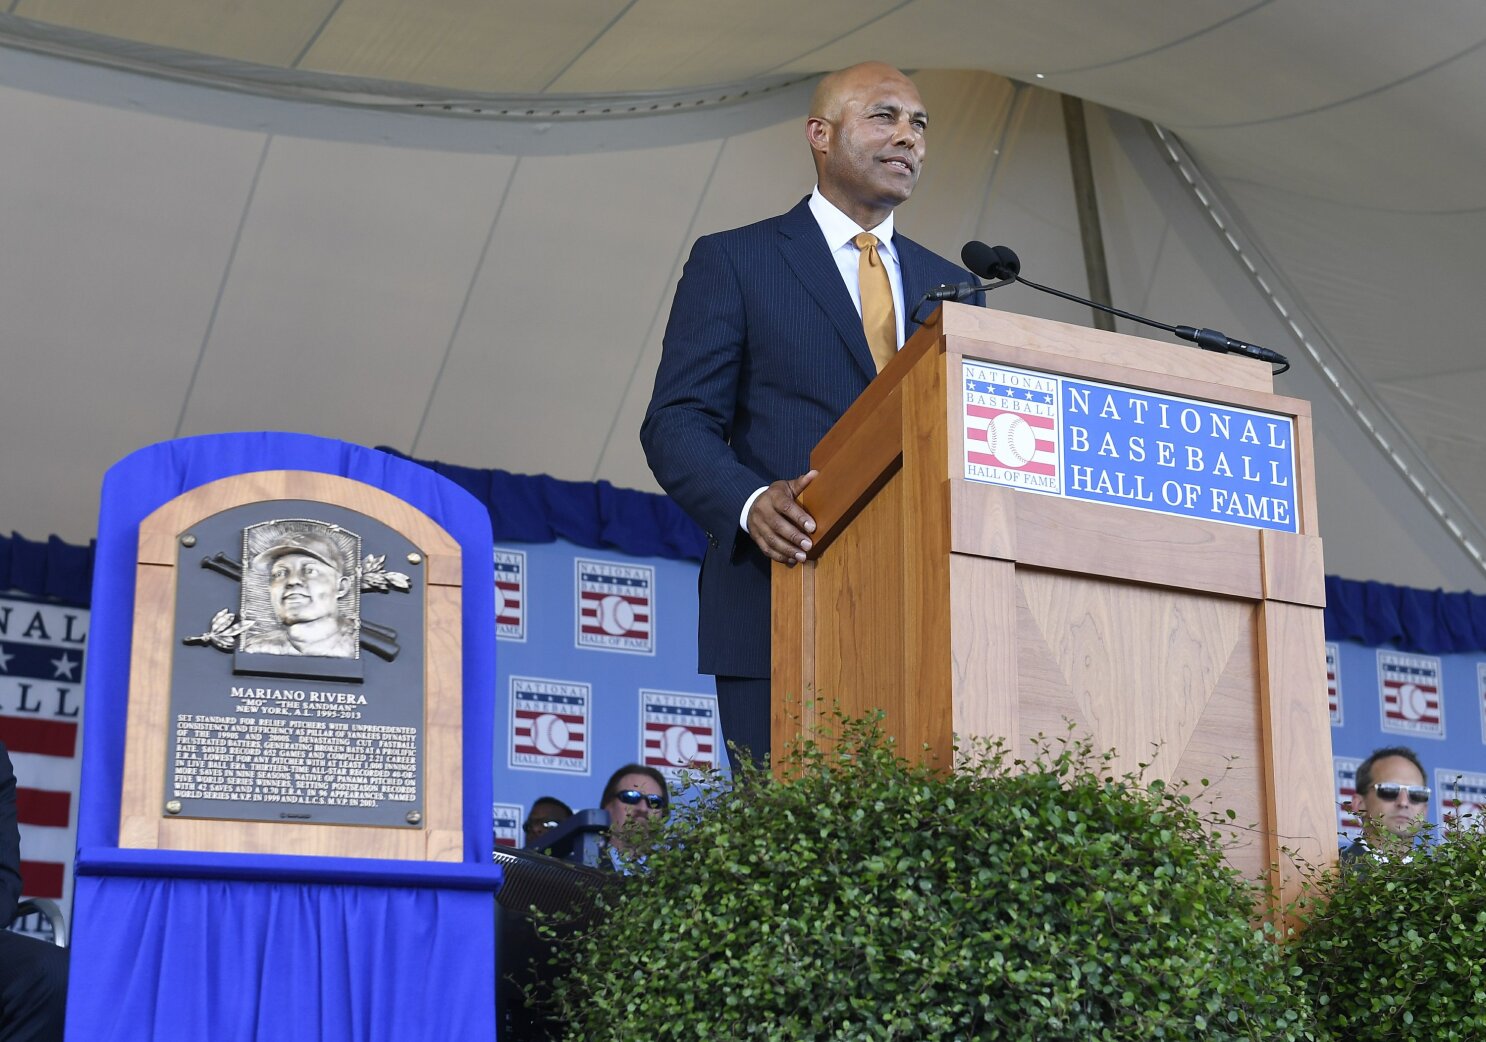 This Day in Yankees History: Mariano Rivera collects his 300th